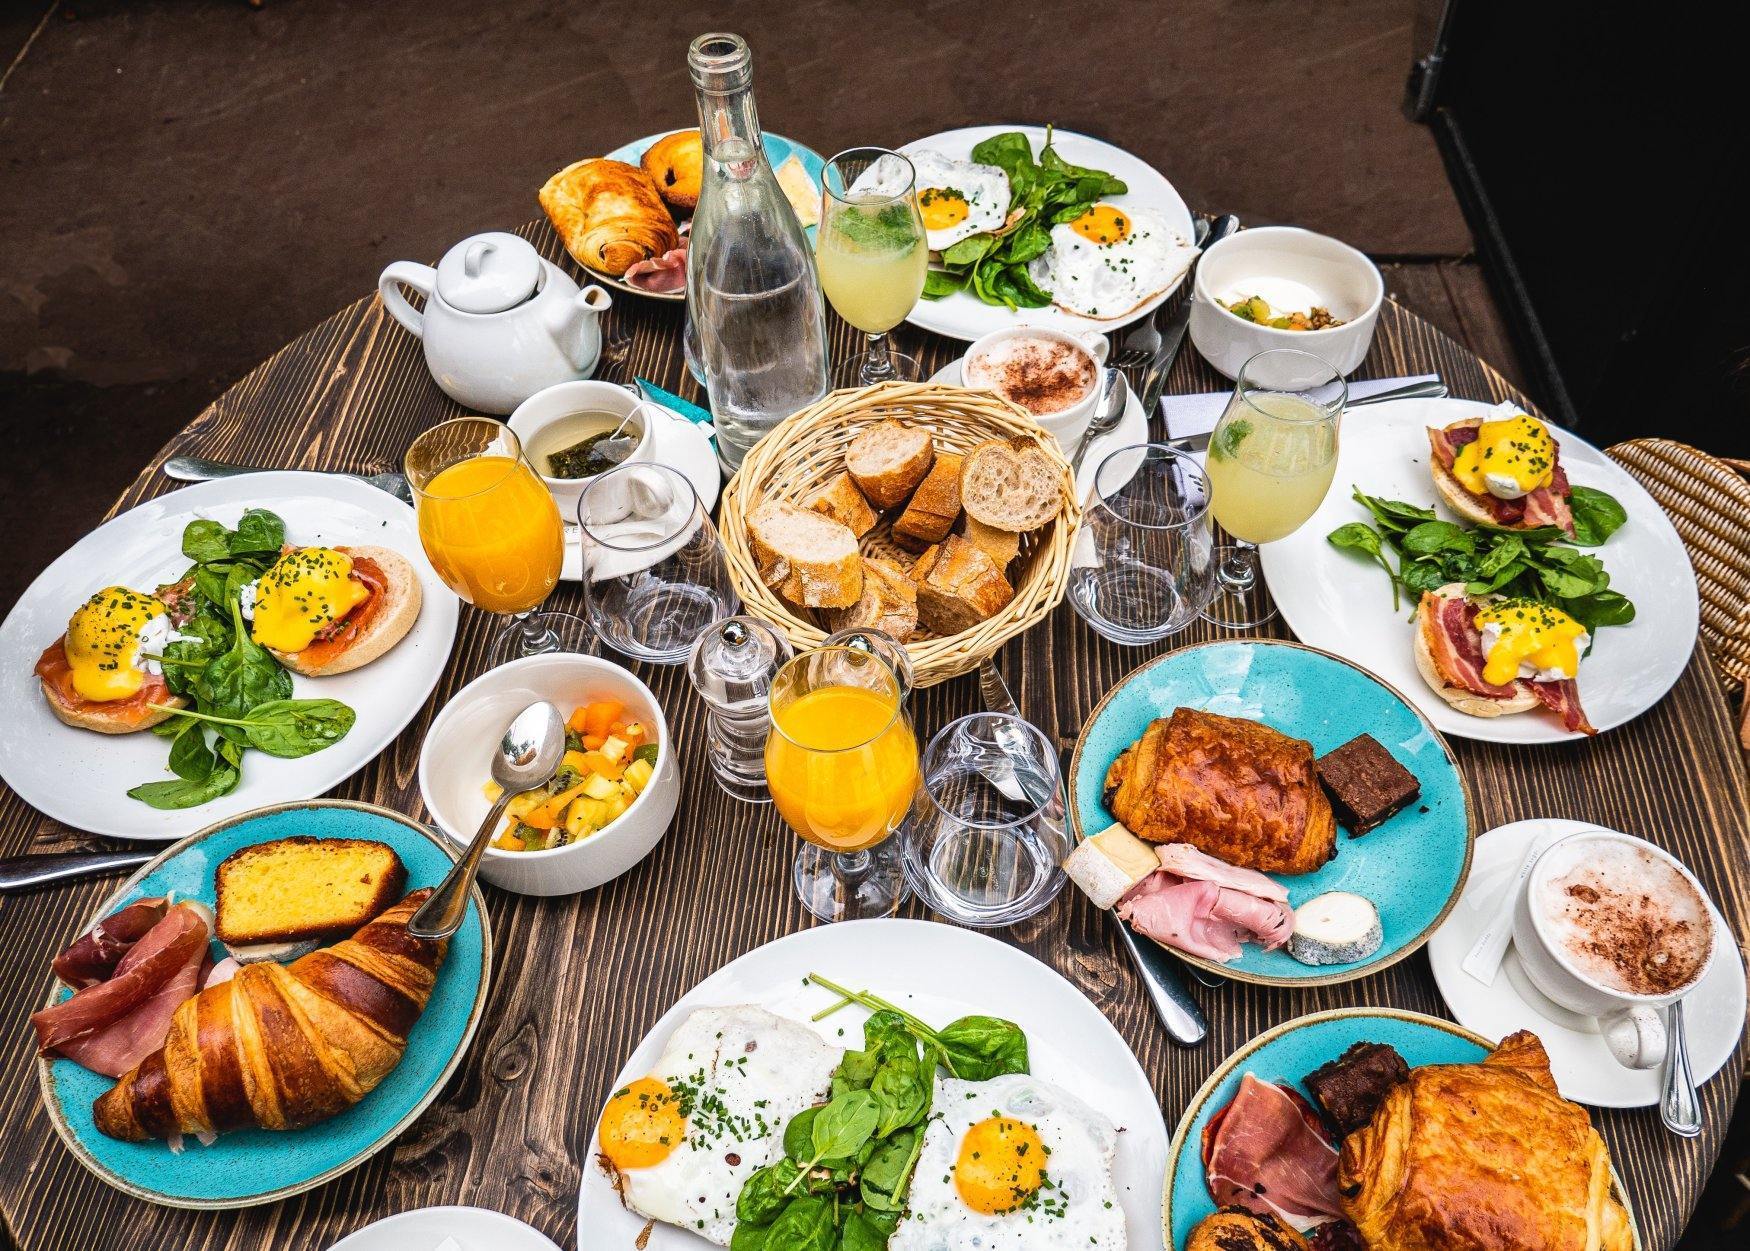 Where to Find the Best Brunch Spots in Montreal